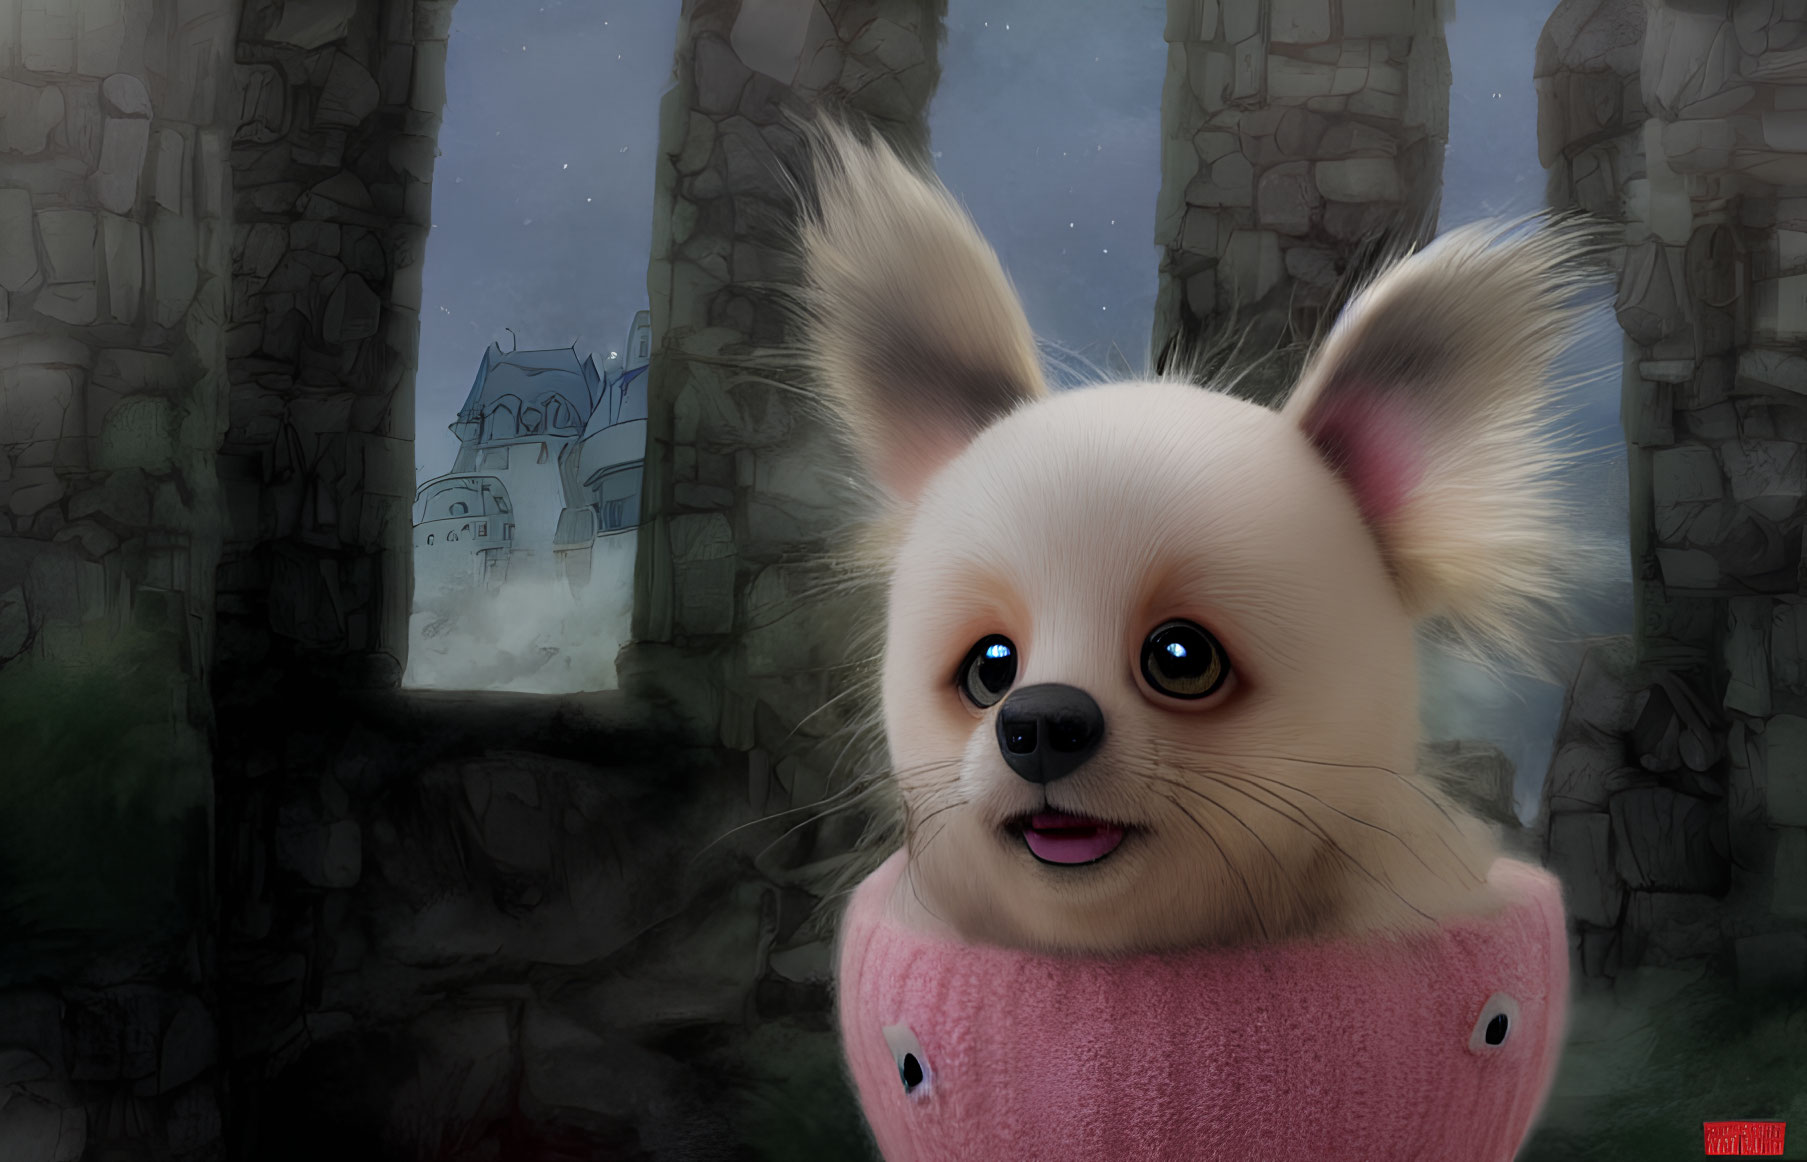 Fluffy Dog in Pink Sweater Amid Mystical Ruins and Castle